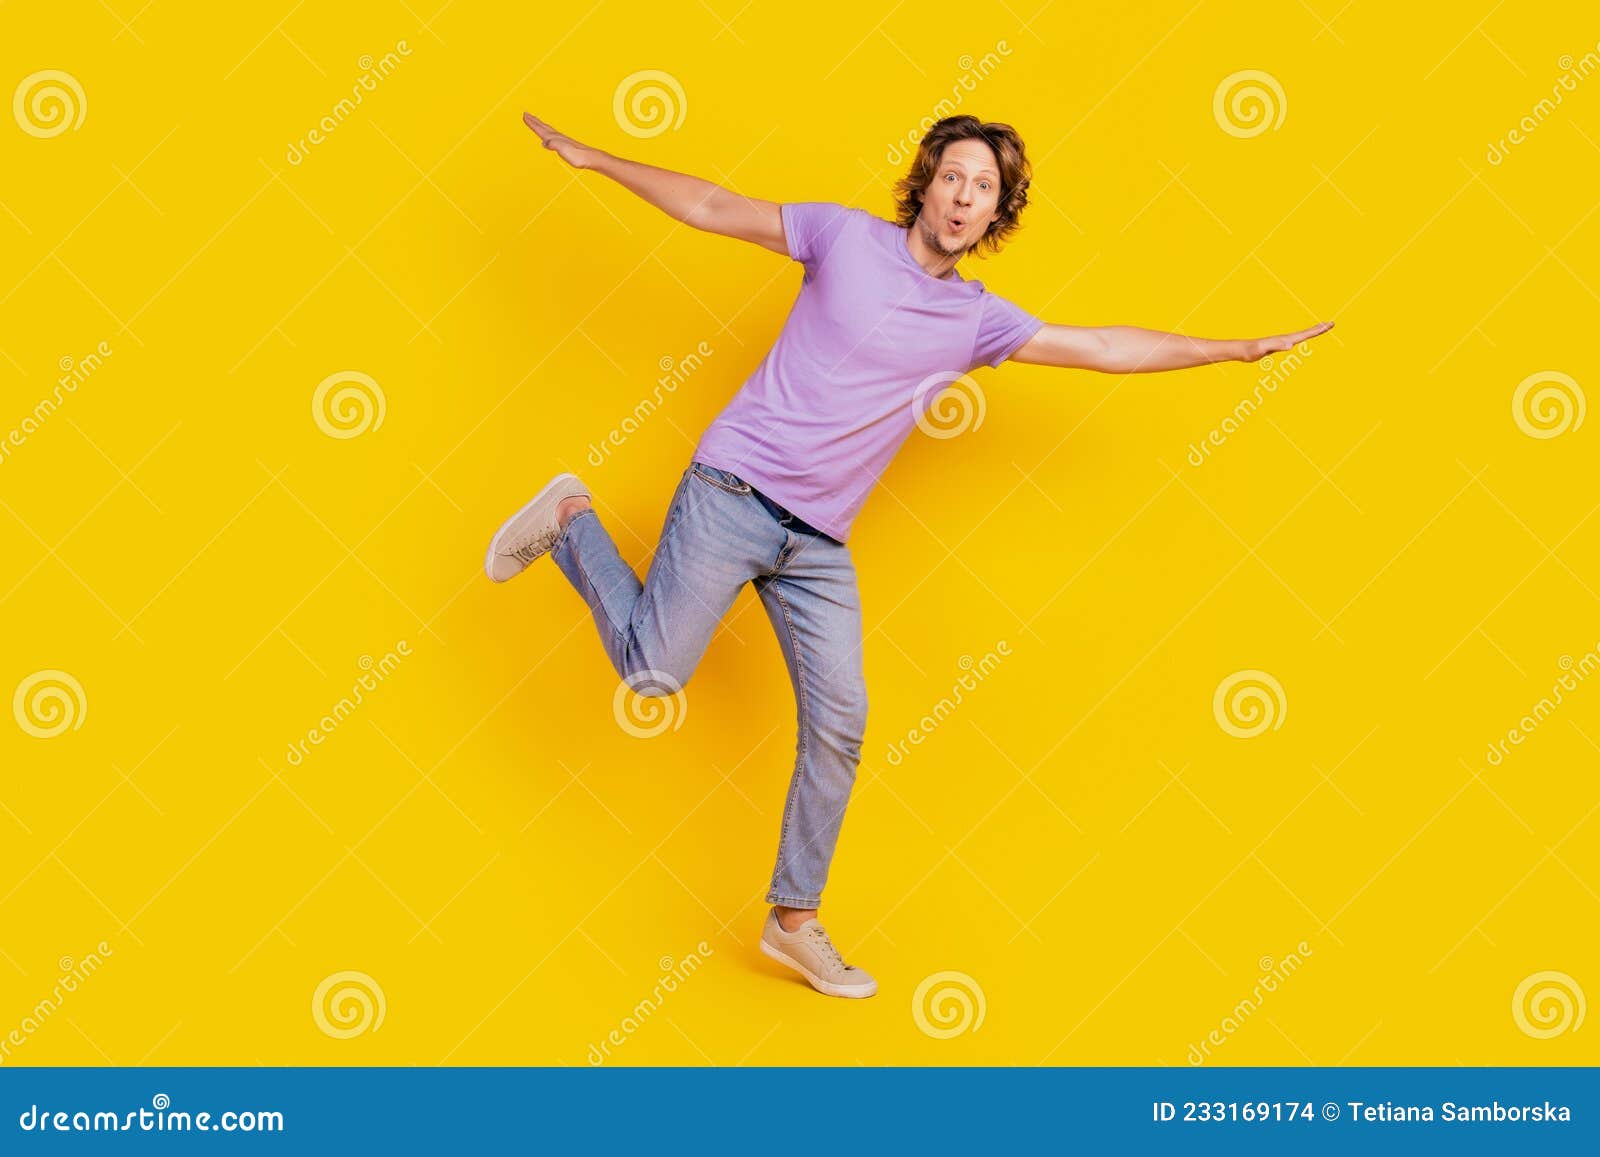 Funny Positive Inspired Guy Stand One Leg Pretend Plane Pose Stock ...